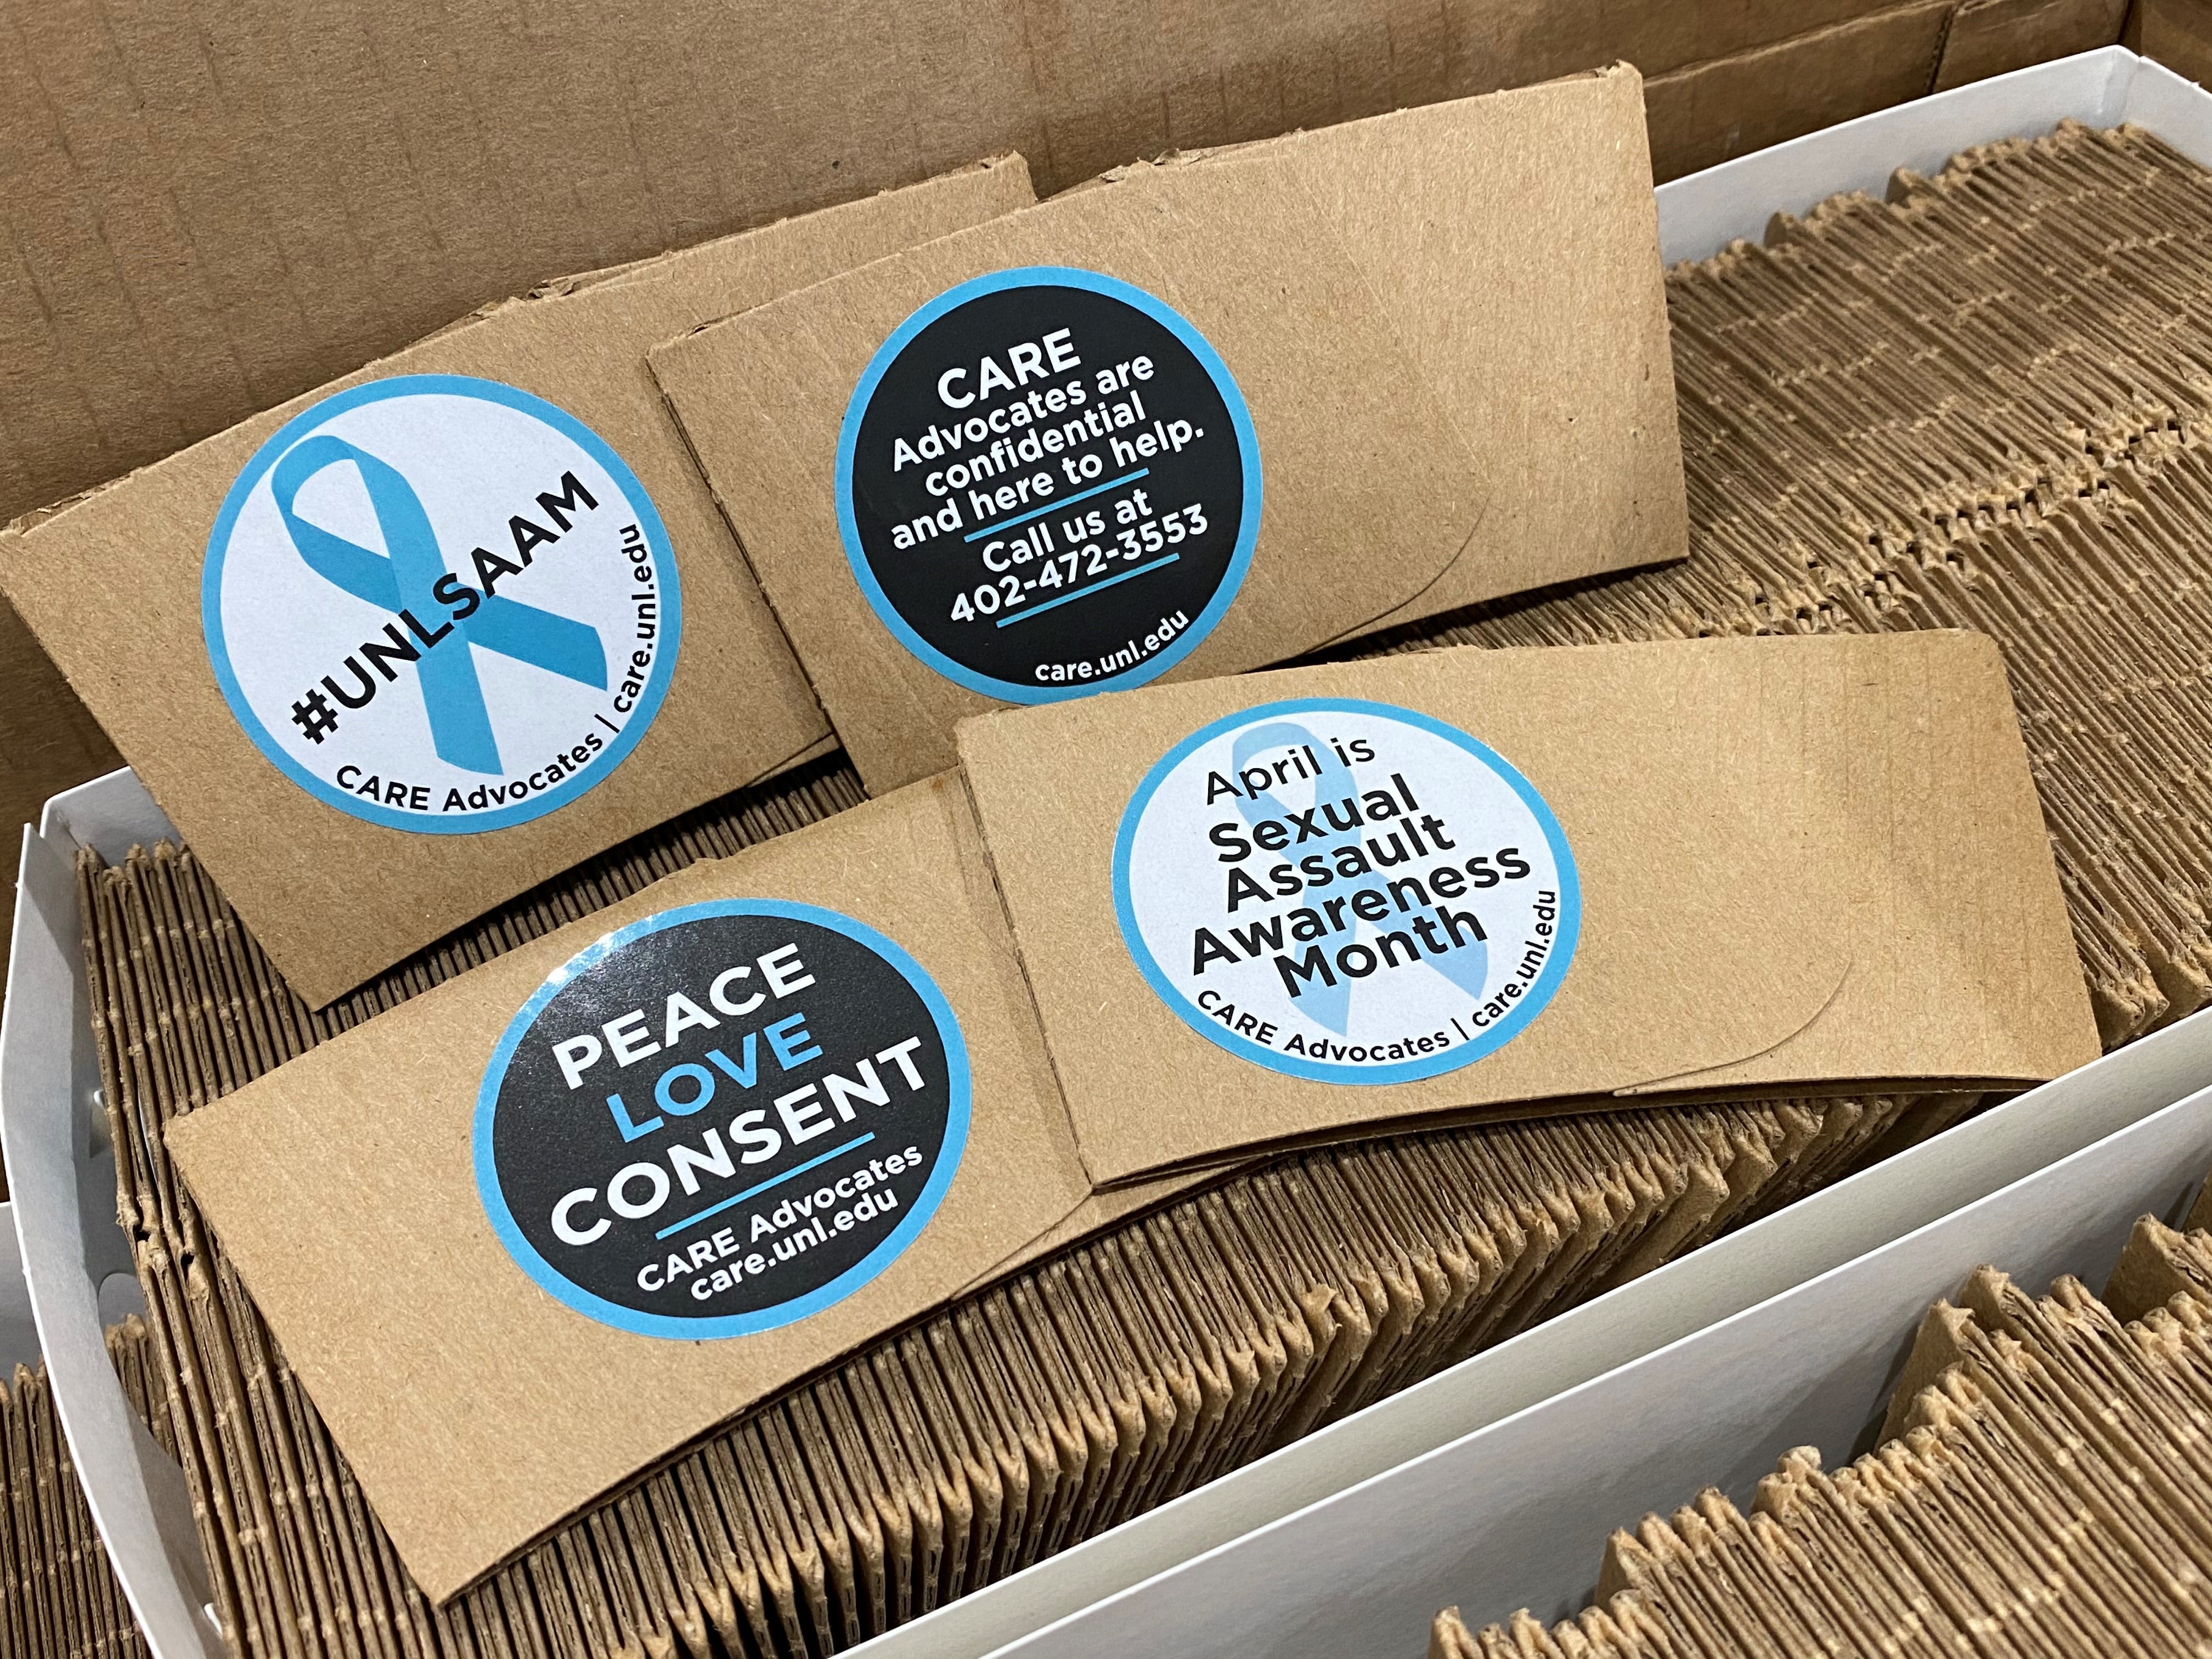 Coffee sleeves at Yes Chef Cafe and Brewed Awakening will promote Sexual Assault Awareness Month throughout April.